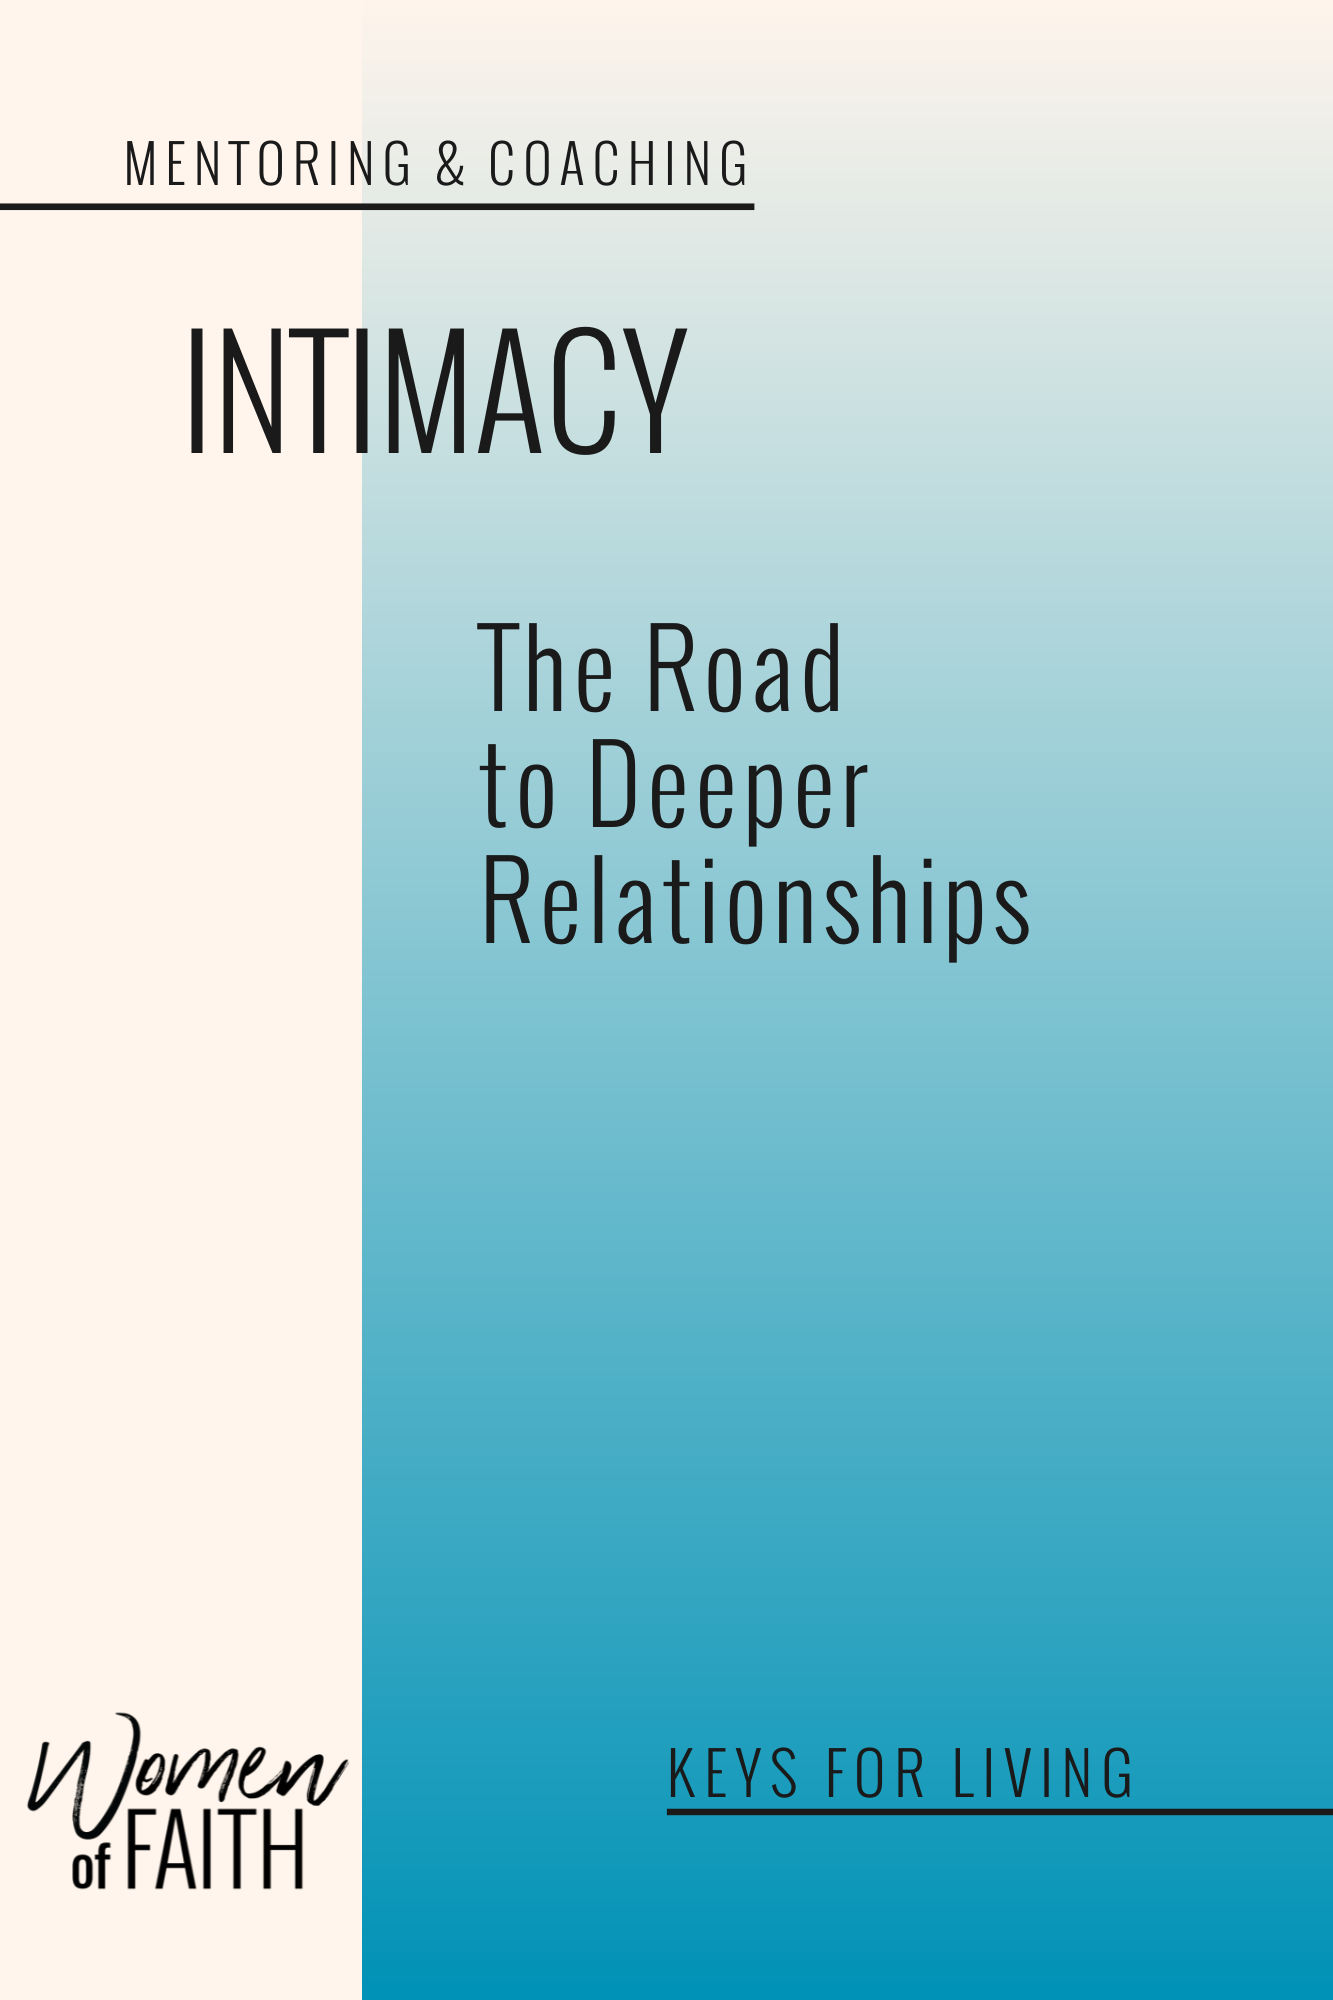 INTIMACY: The Road to Deeper Relationships (E-BOOK)